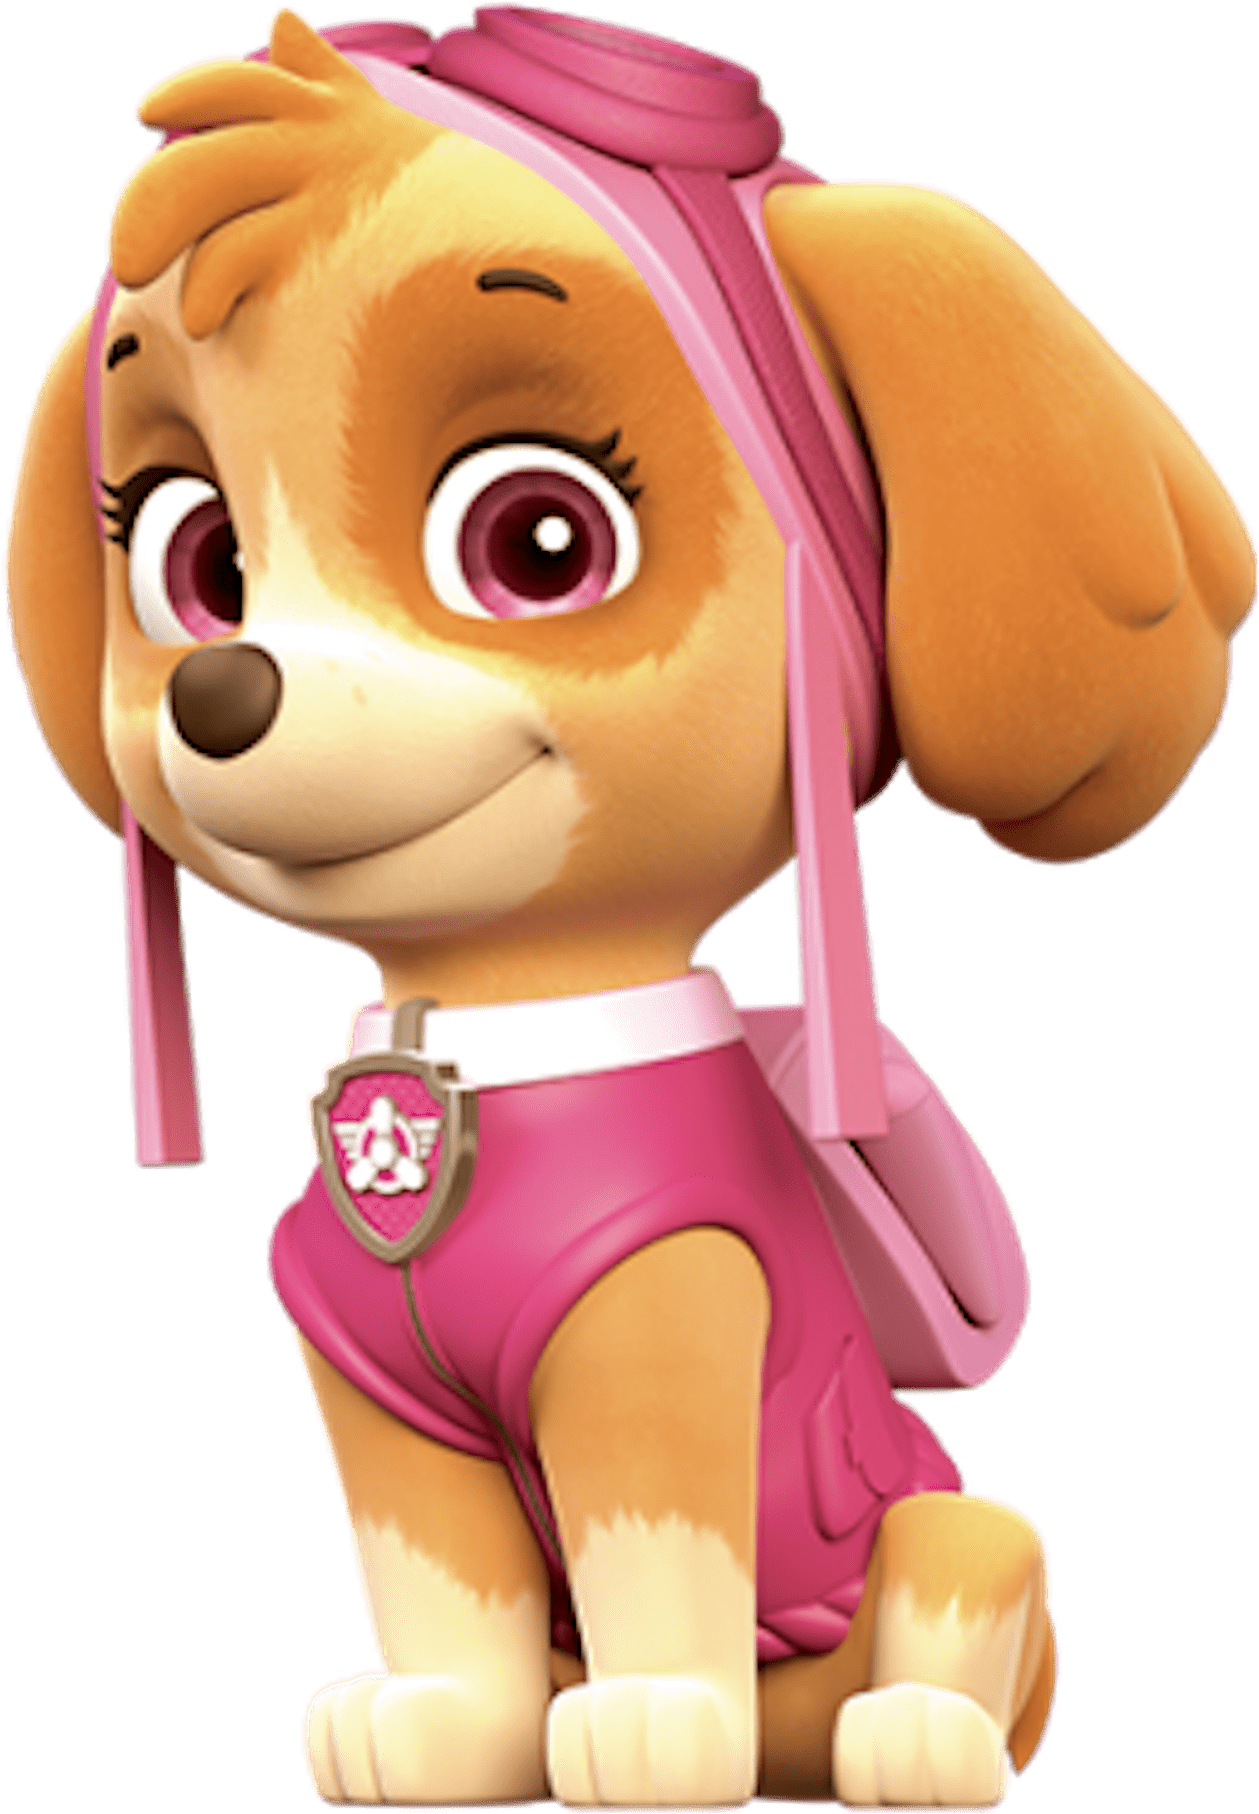 A Cartoon Dog Wearing A Pink Outfit